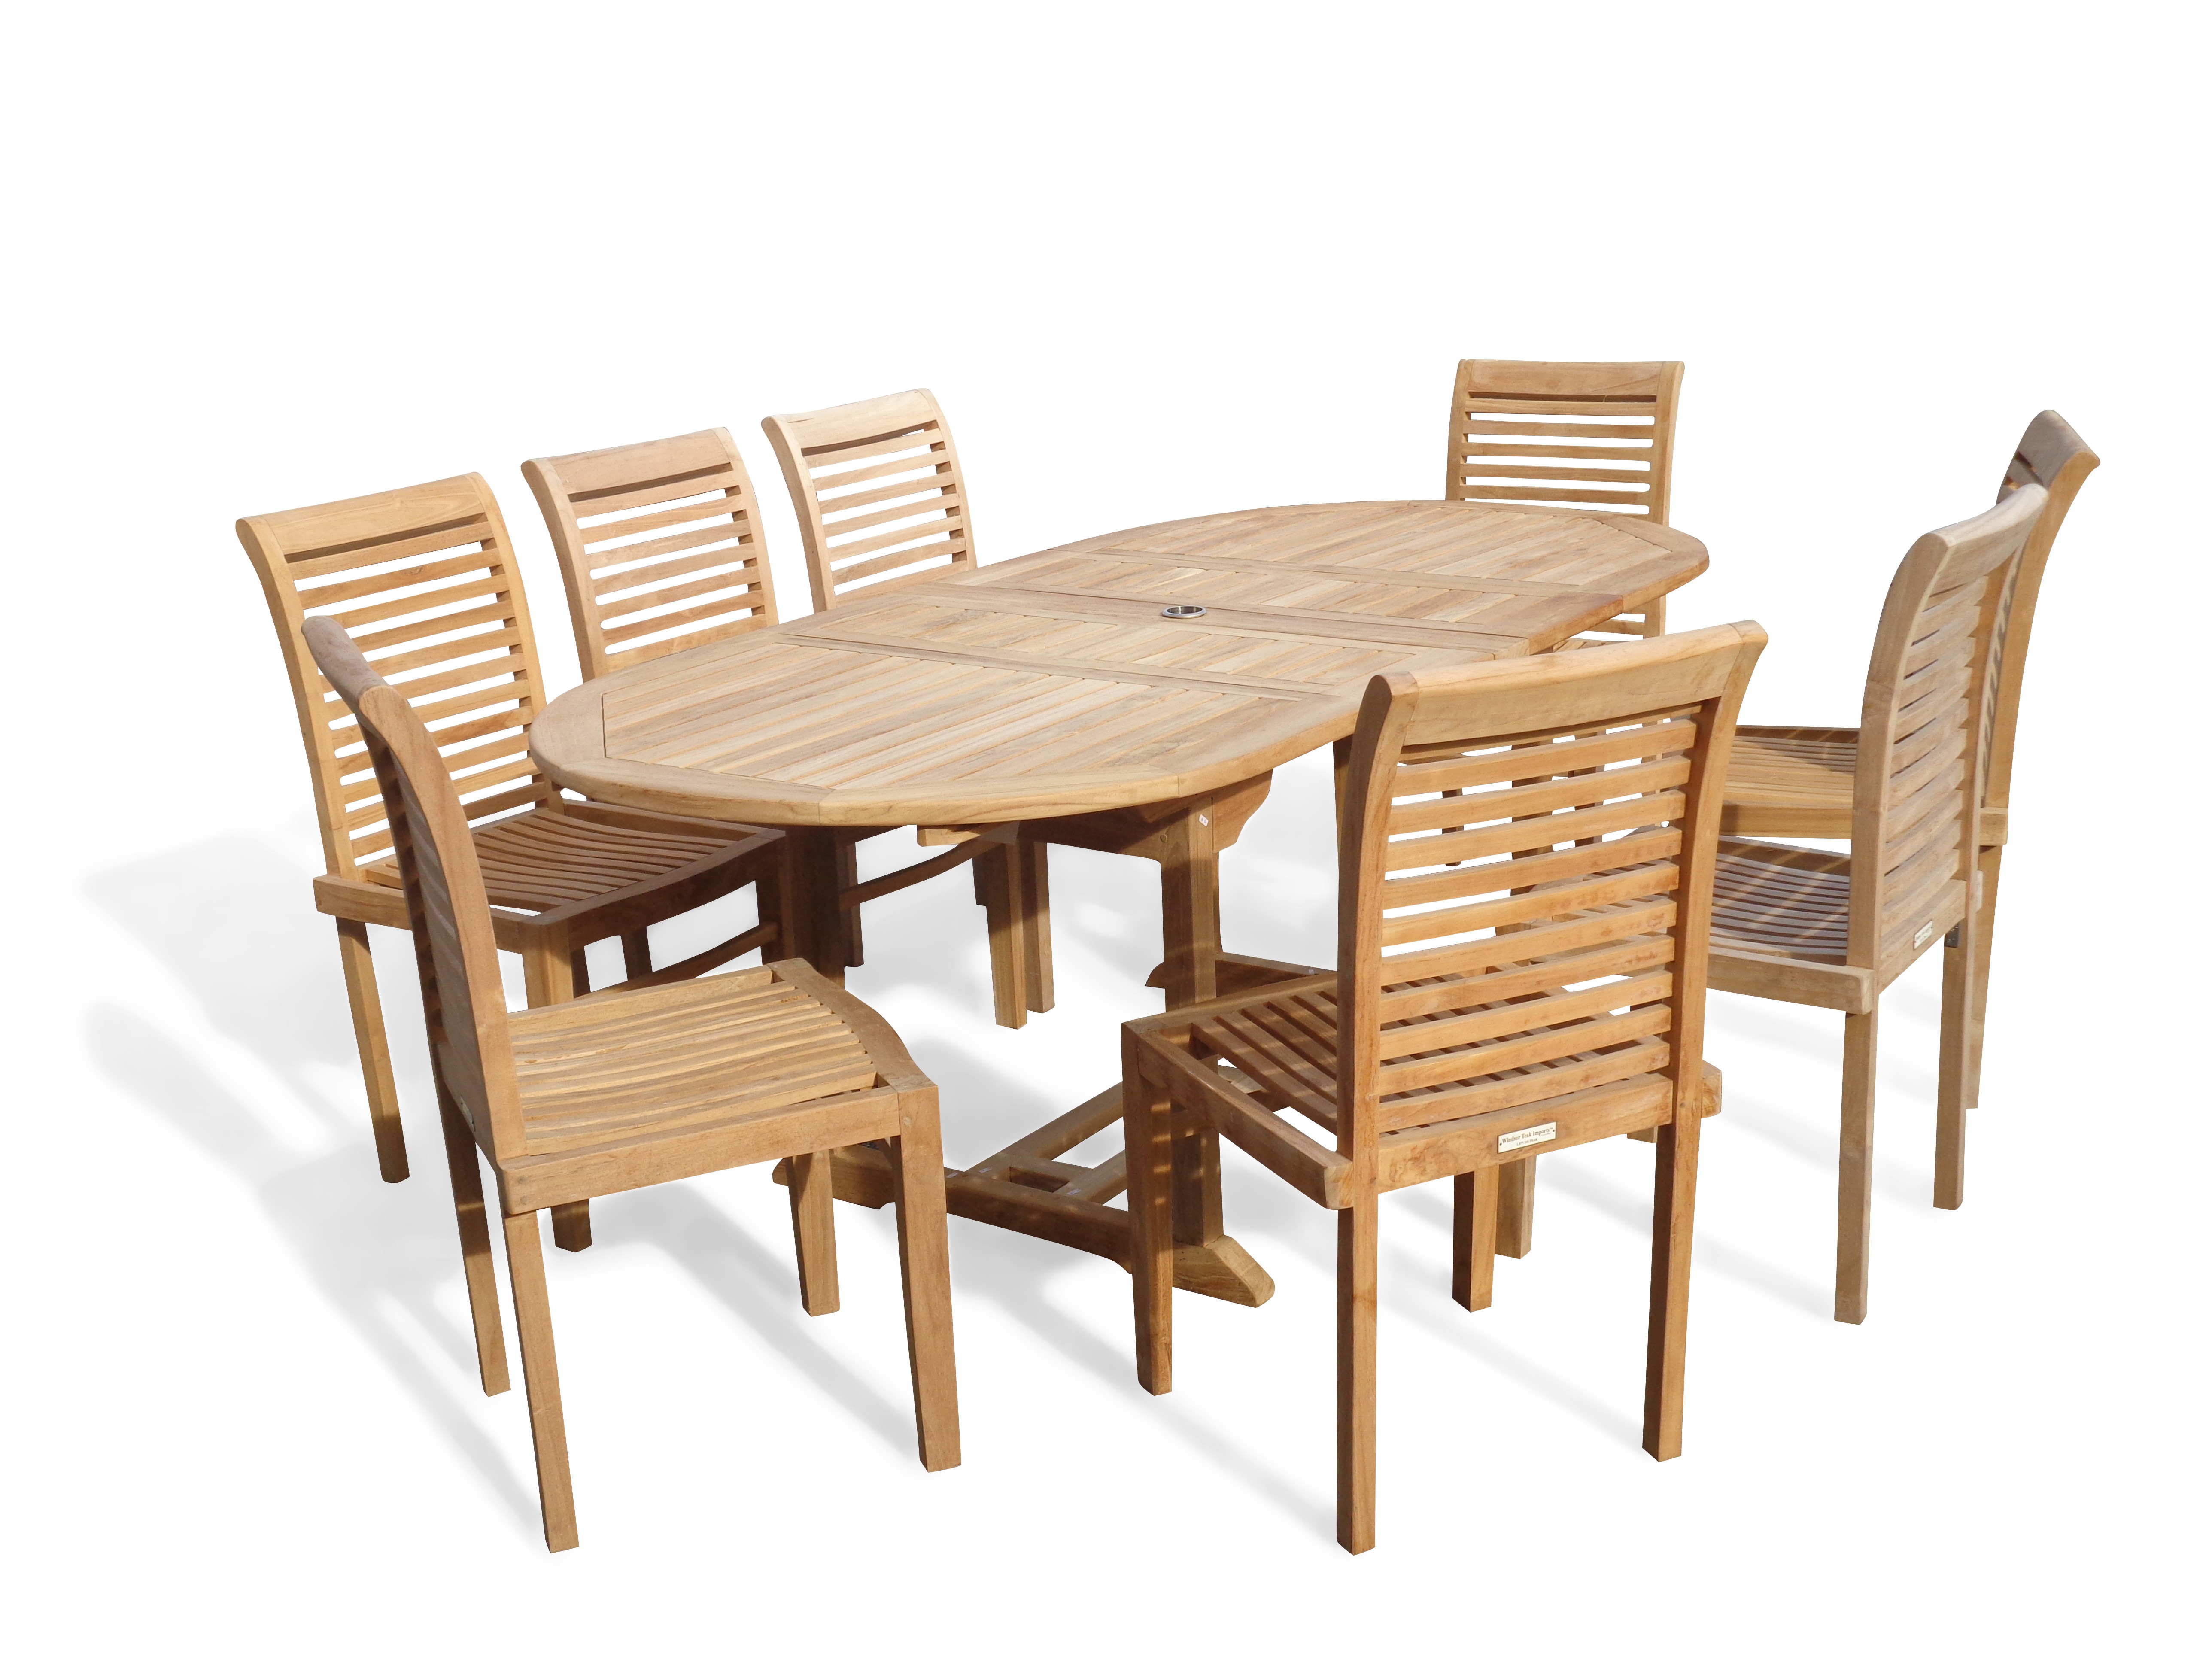 Buckingham 82" x 39" Double Leaf Oval Extension Teak Table W/8 Casa Blanca Armless Stacking Chairs.